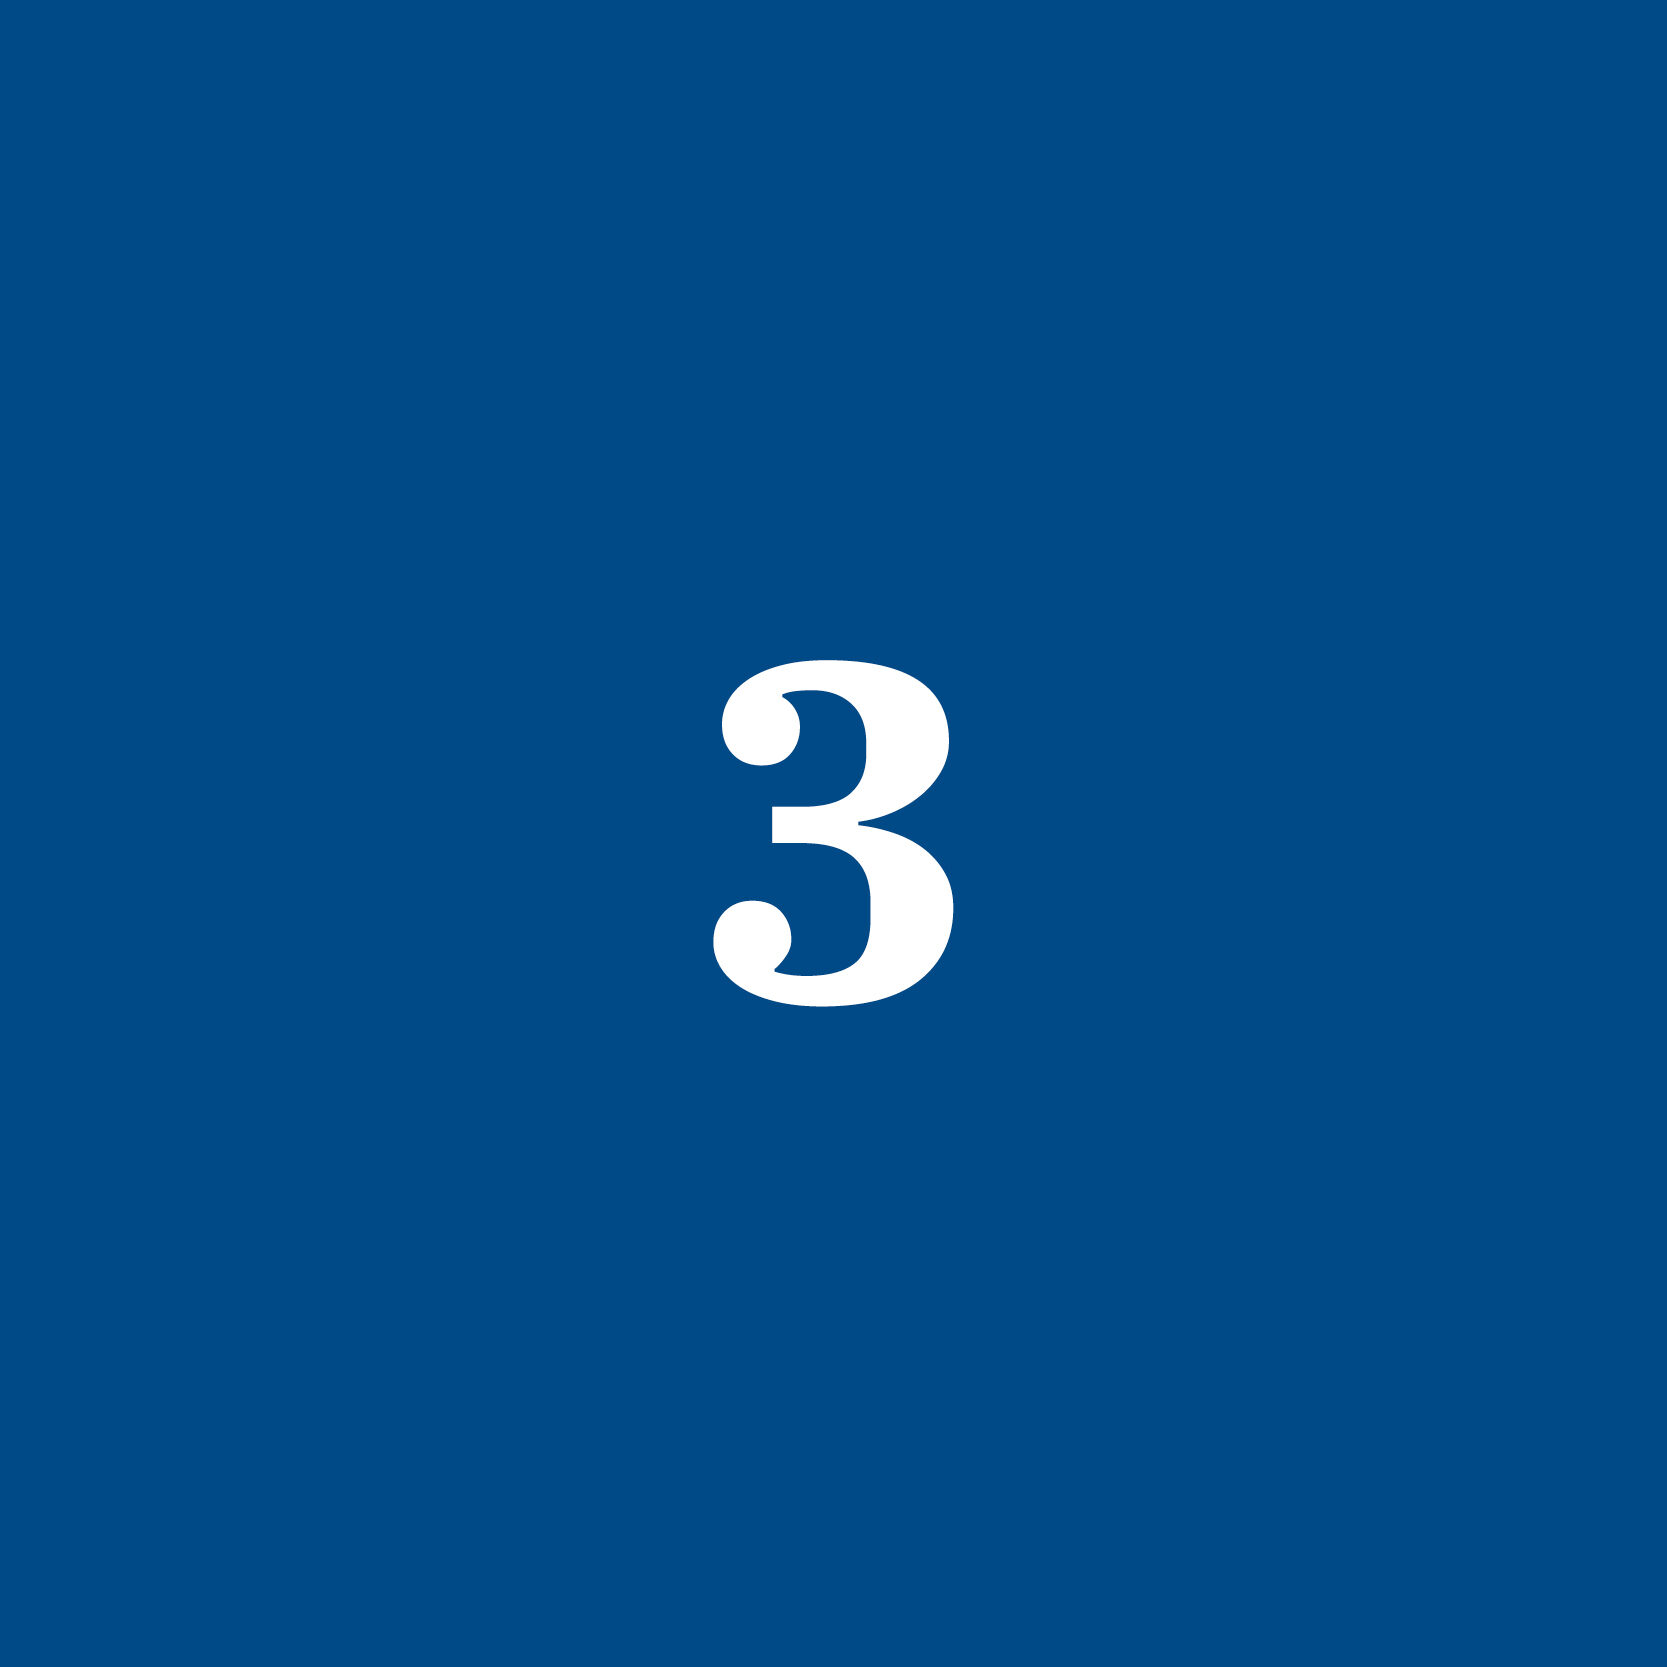 Blue background with a white number 3